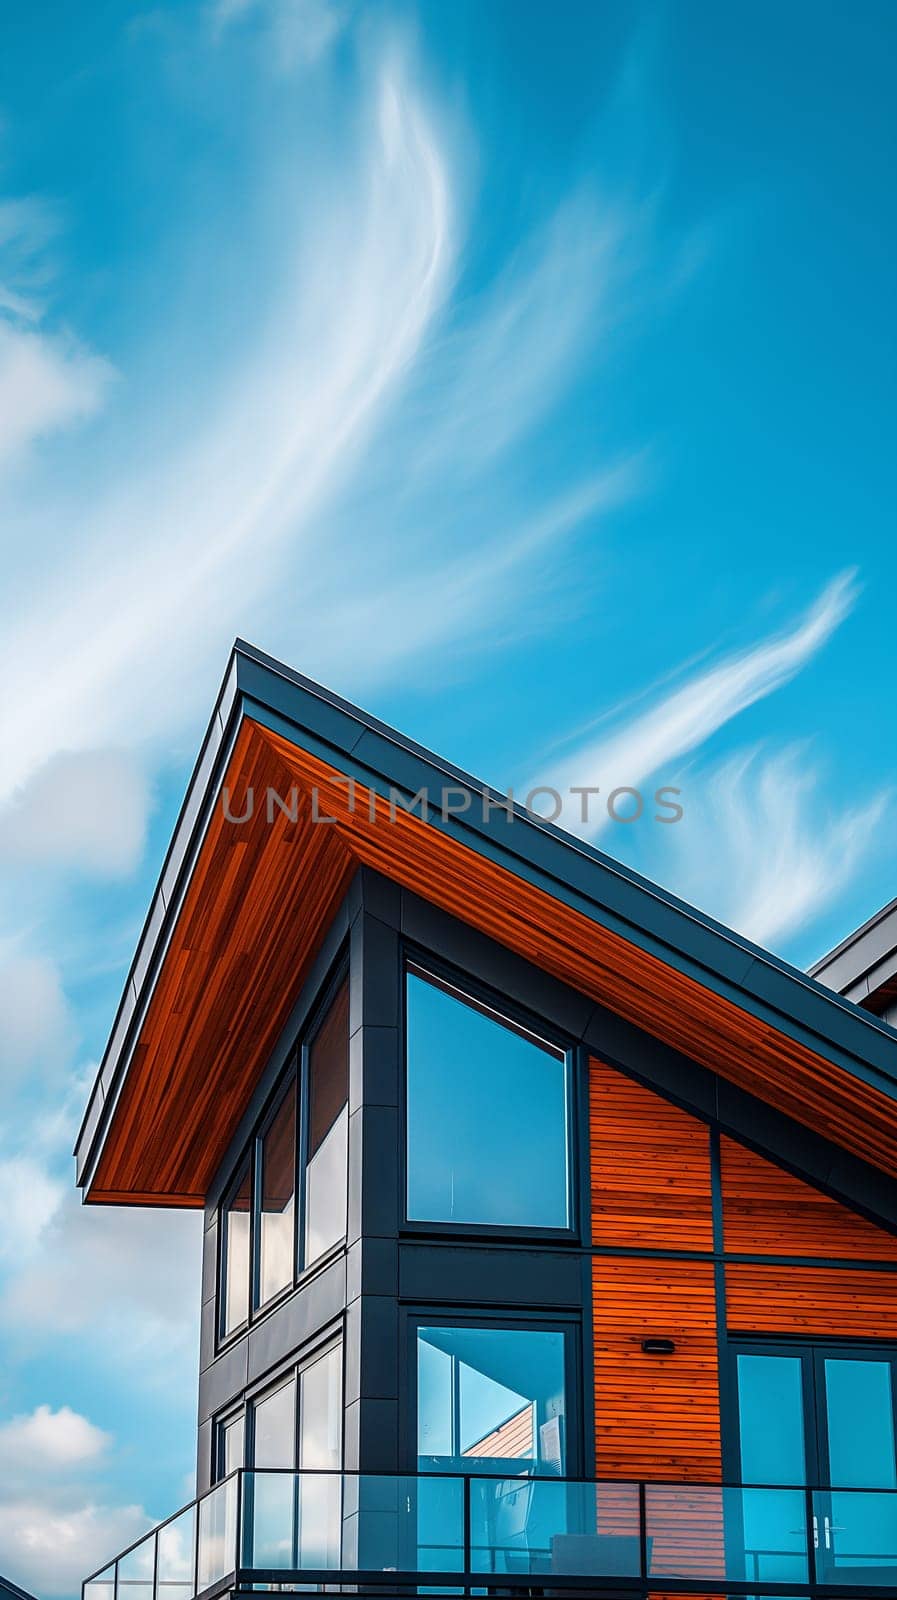 Modern Architecture Against a Blue Sky With Wispy Clouds by chrisroll